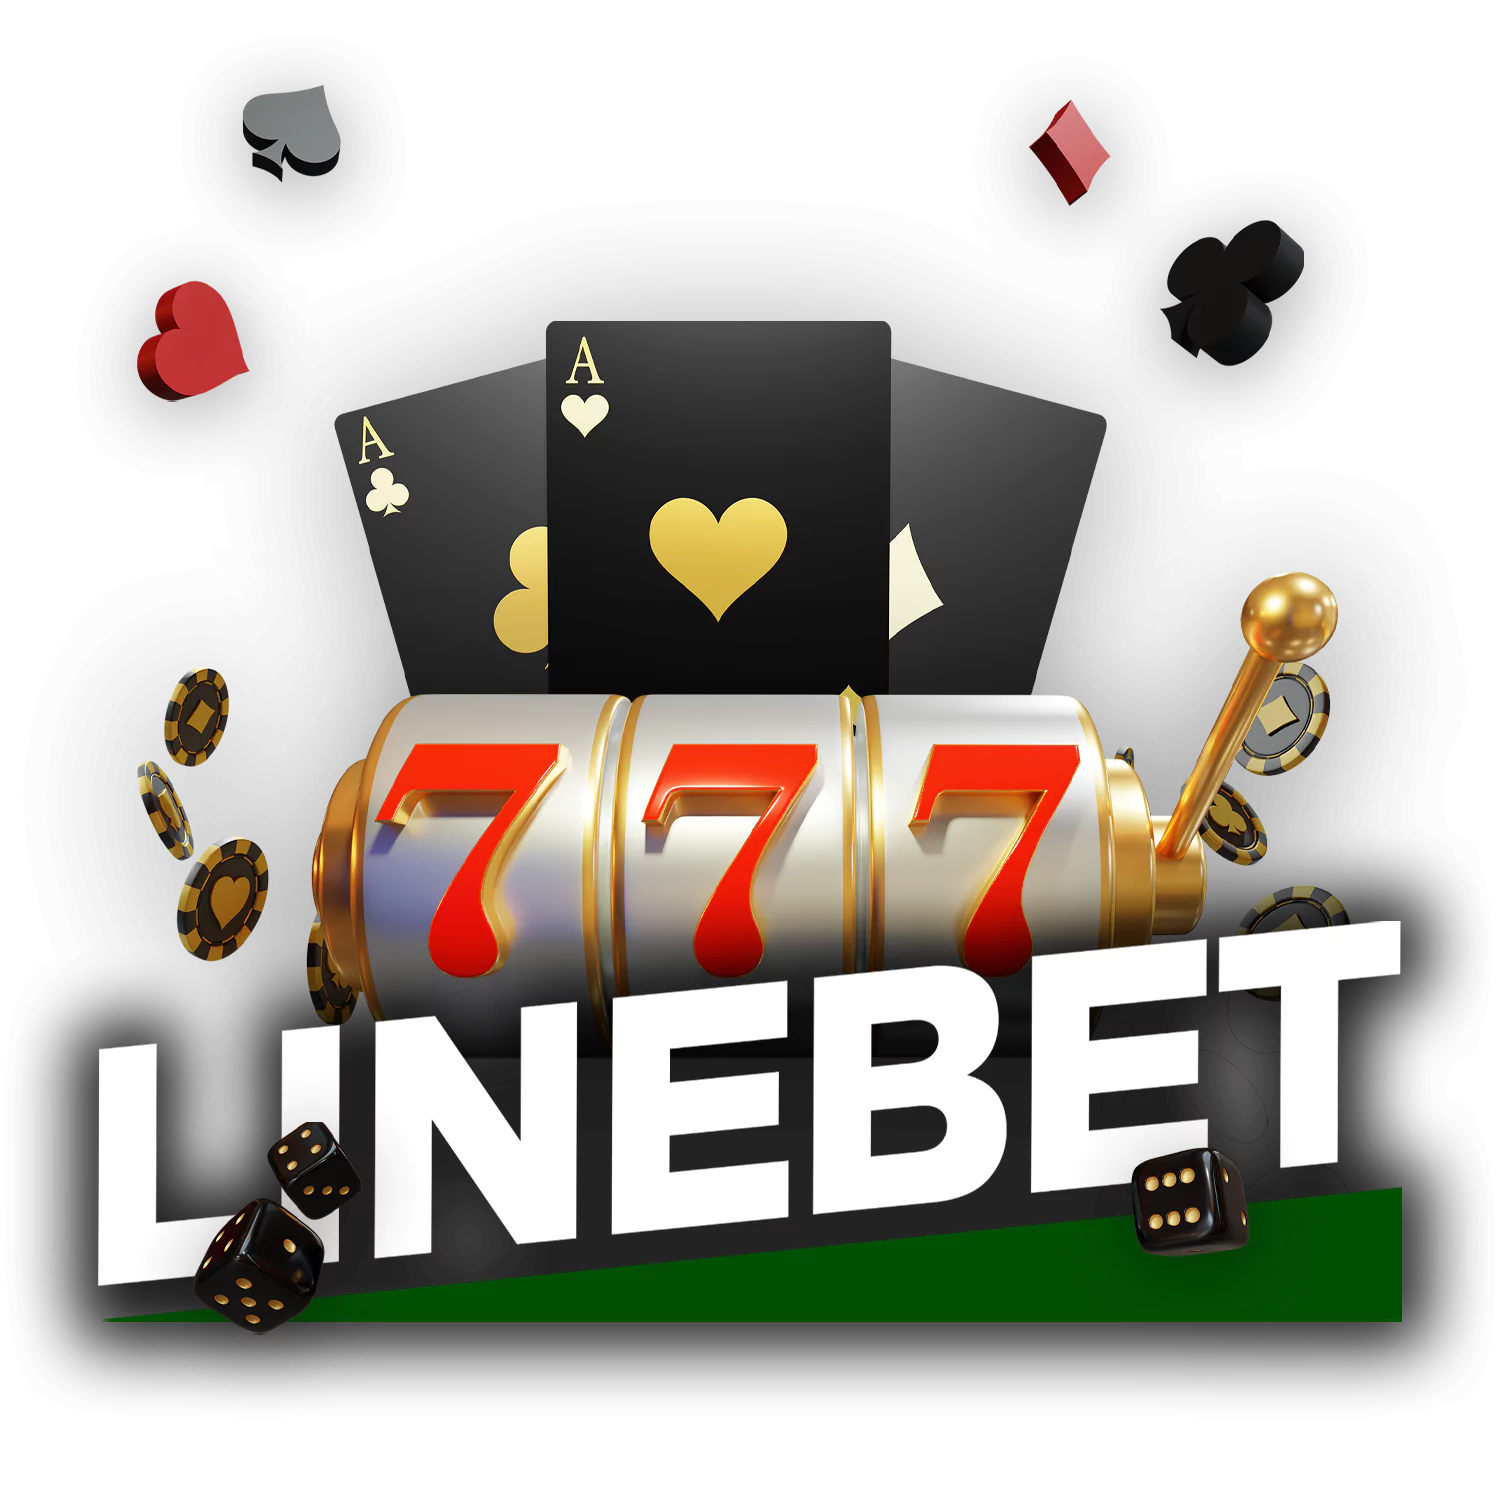 Learn how to play TV Games on the Linebet site and in the app.